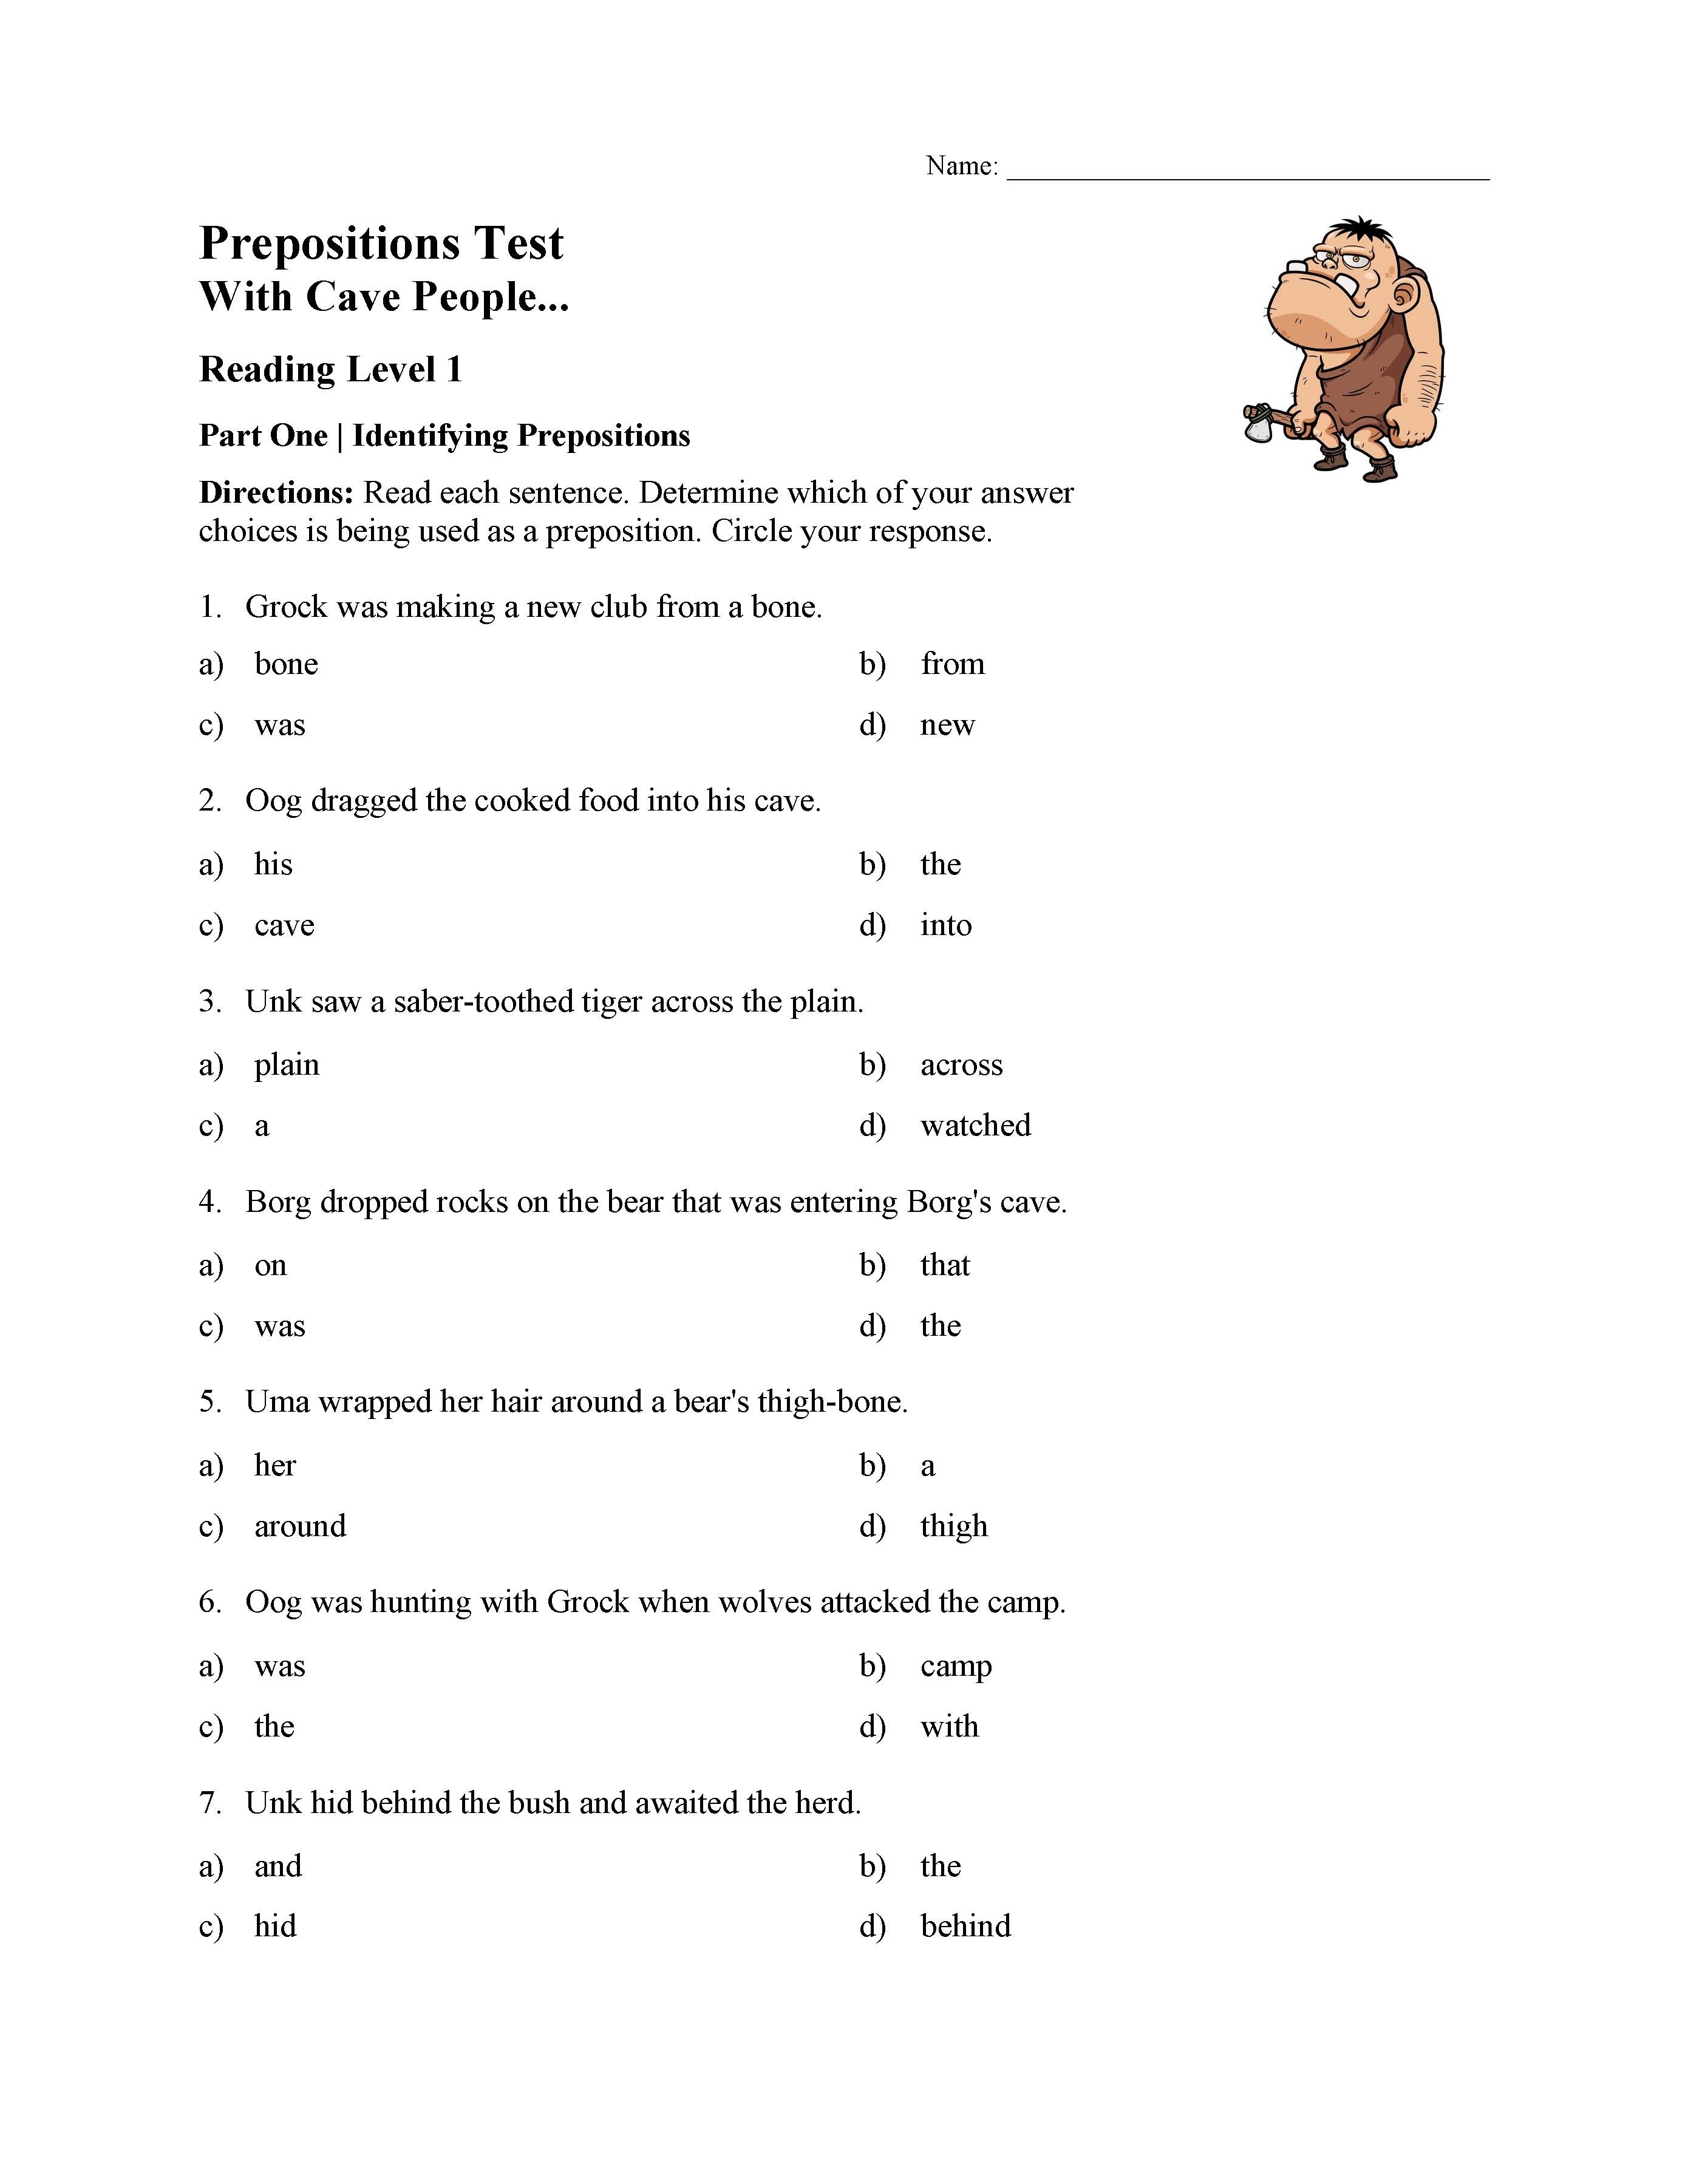 This is a preview image of the Prepositions Test 1 - Reading Level 1.